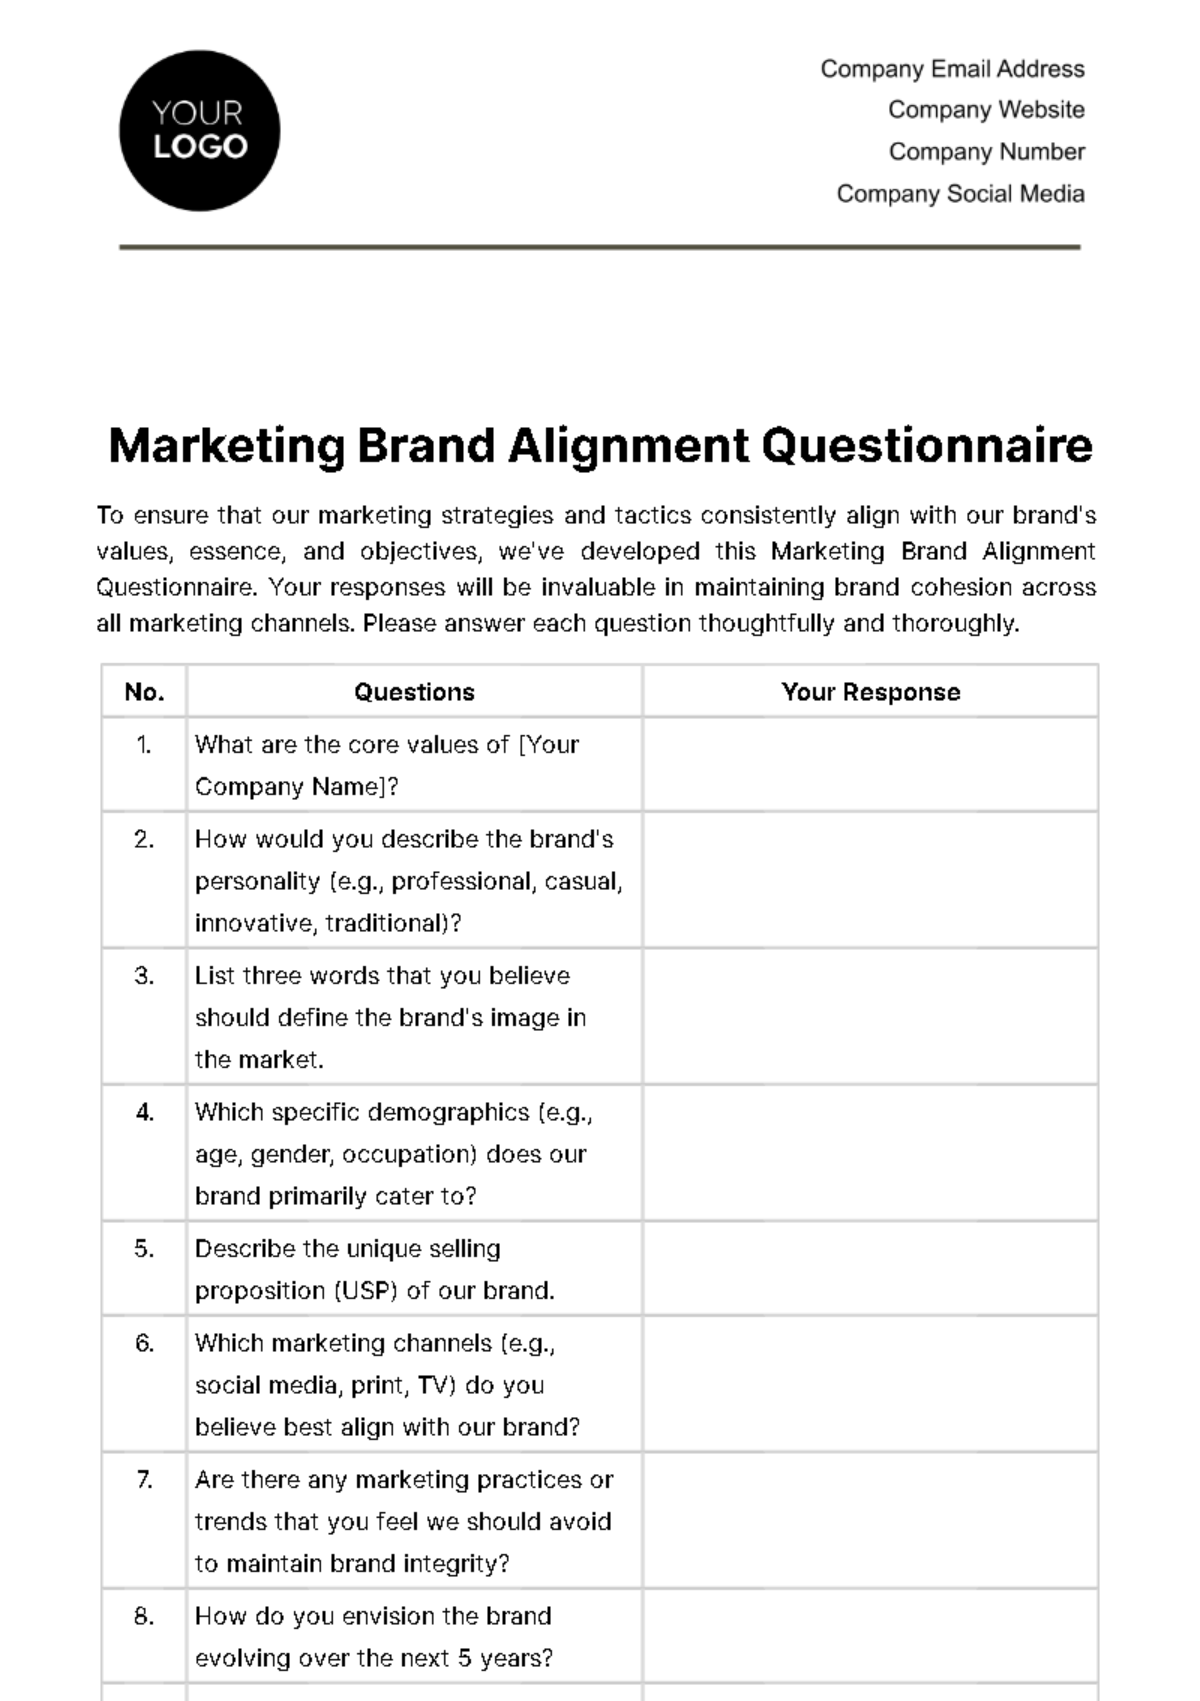 Free Marketing Brand Alignment Questionnaire Template